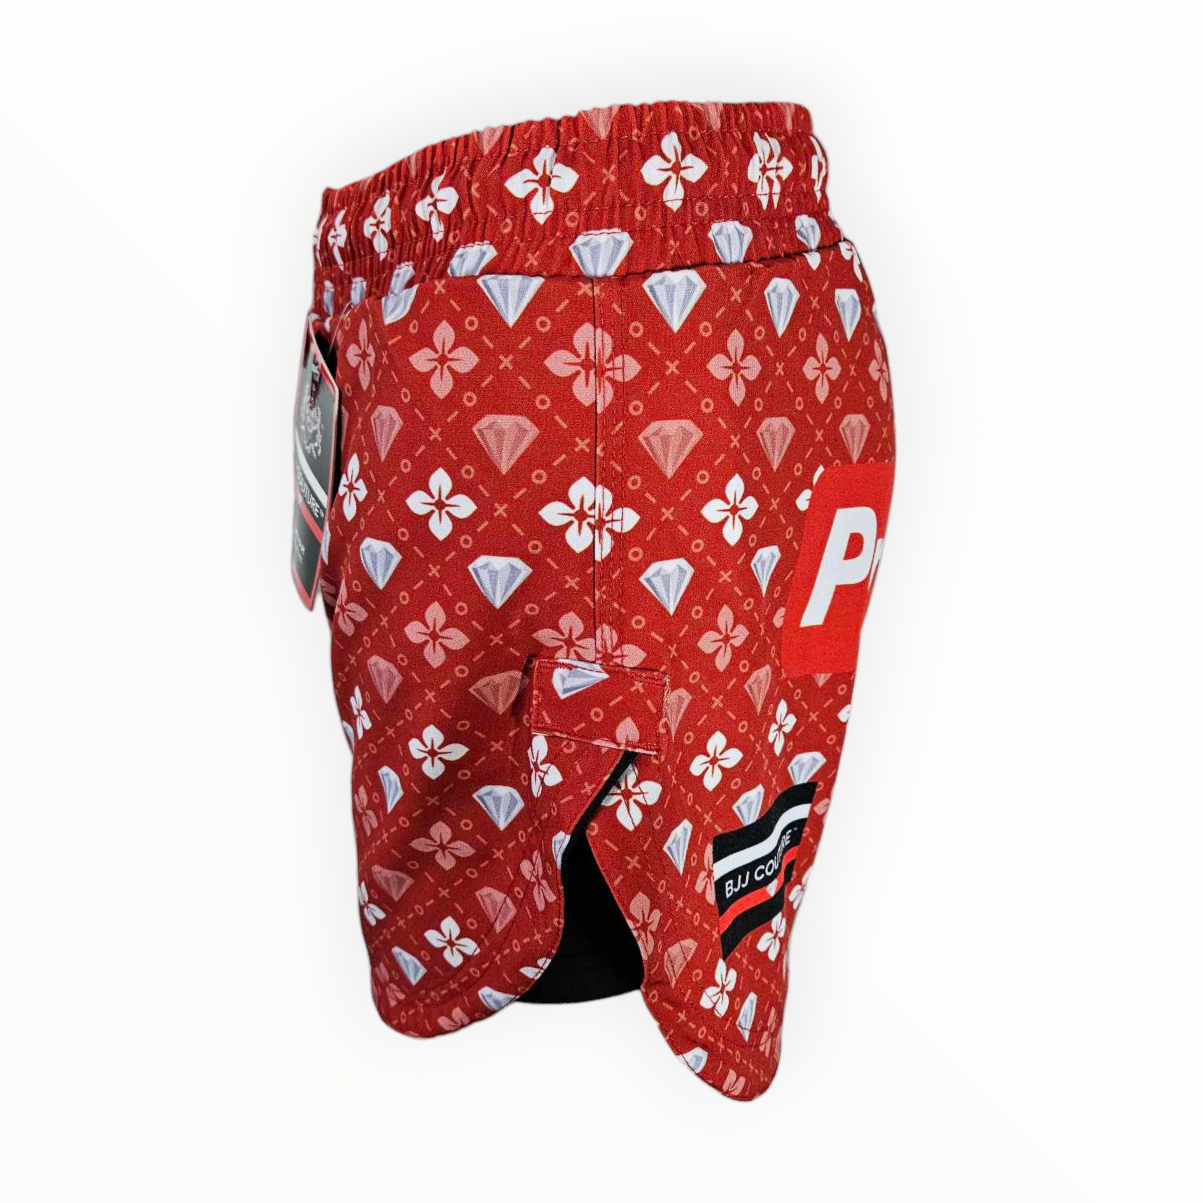 BJJ Couture Red Seamless Diamond Grappling Shorts